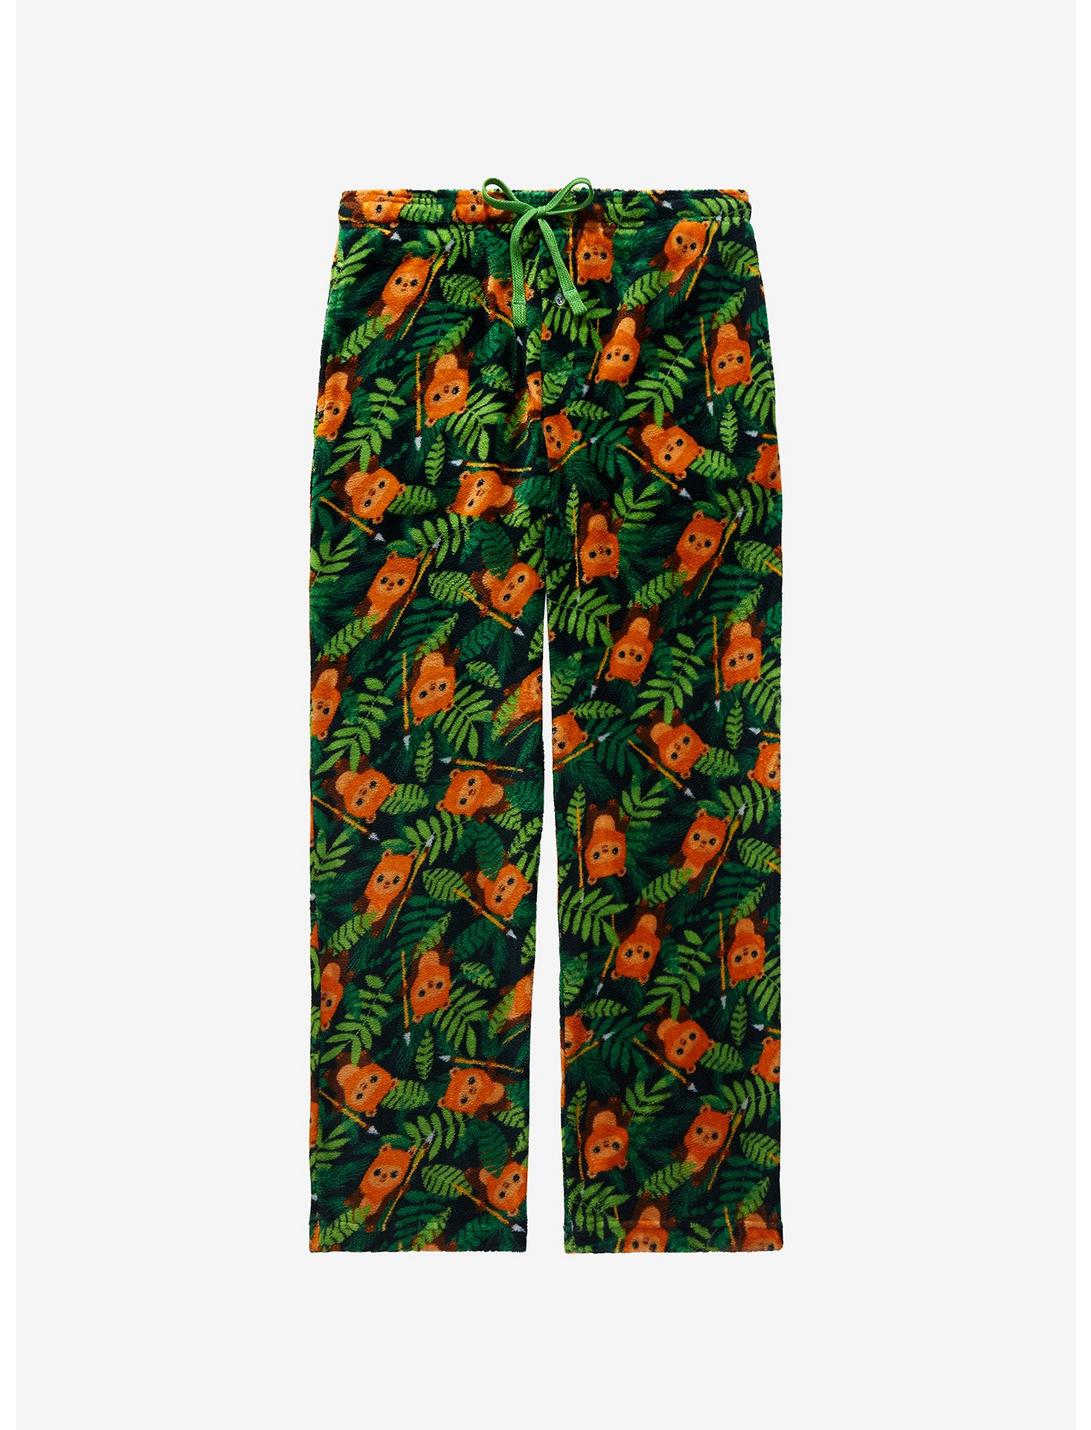 Star Wars Chibi Ewoks Allover Print Sleep Pants - BoxLunch Exclusive, FOREST GREEN, hi-res